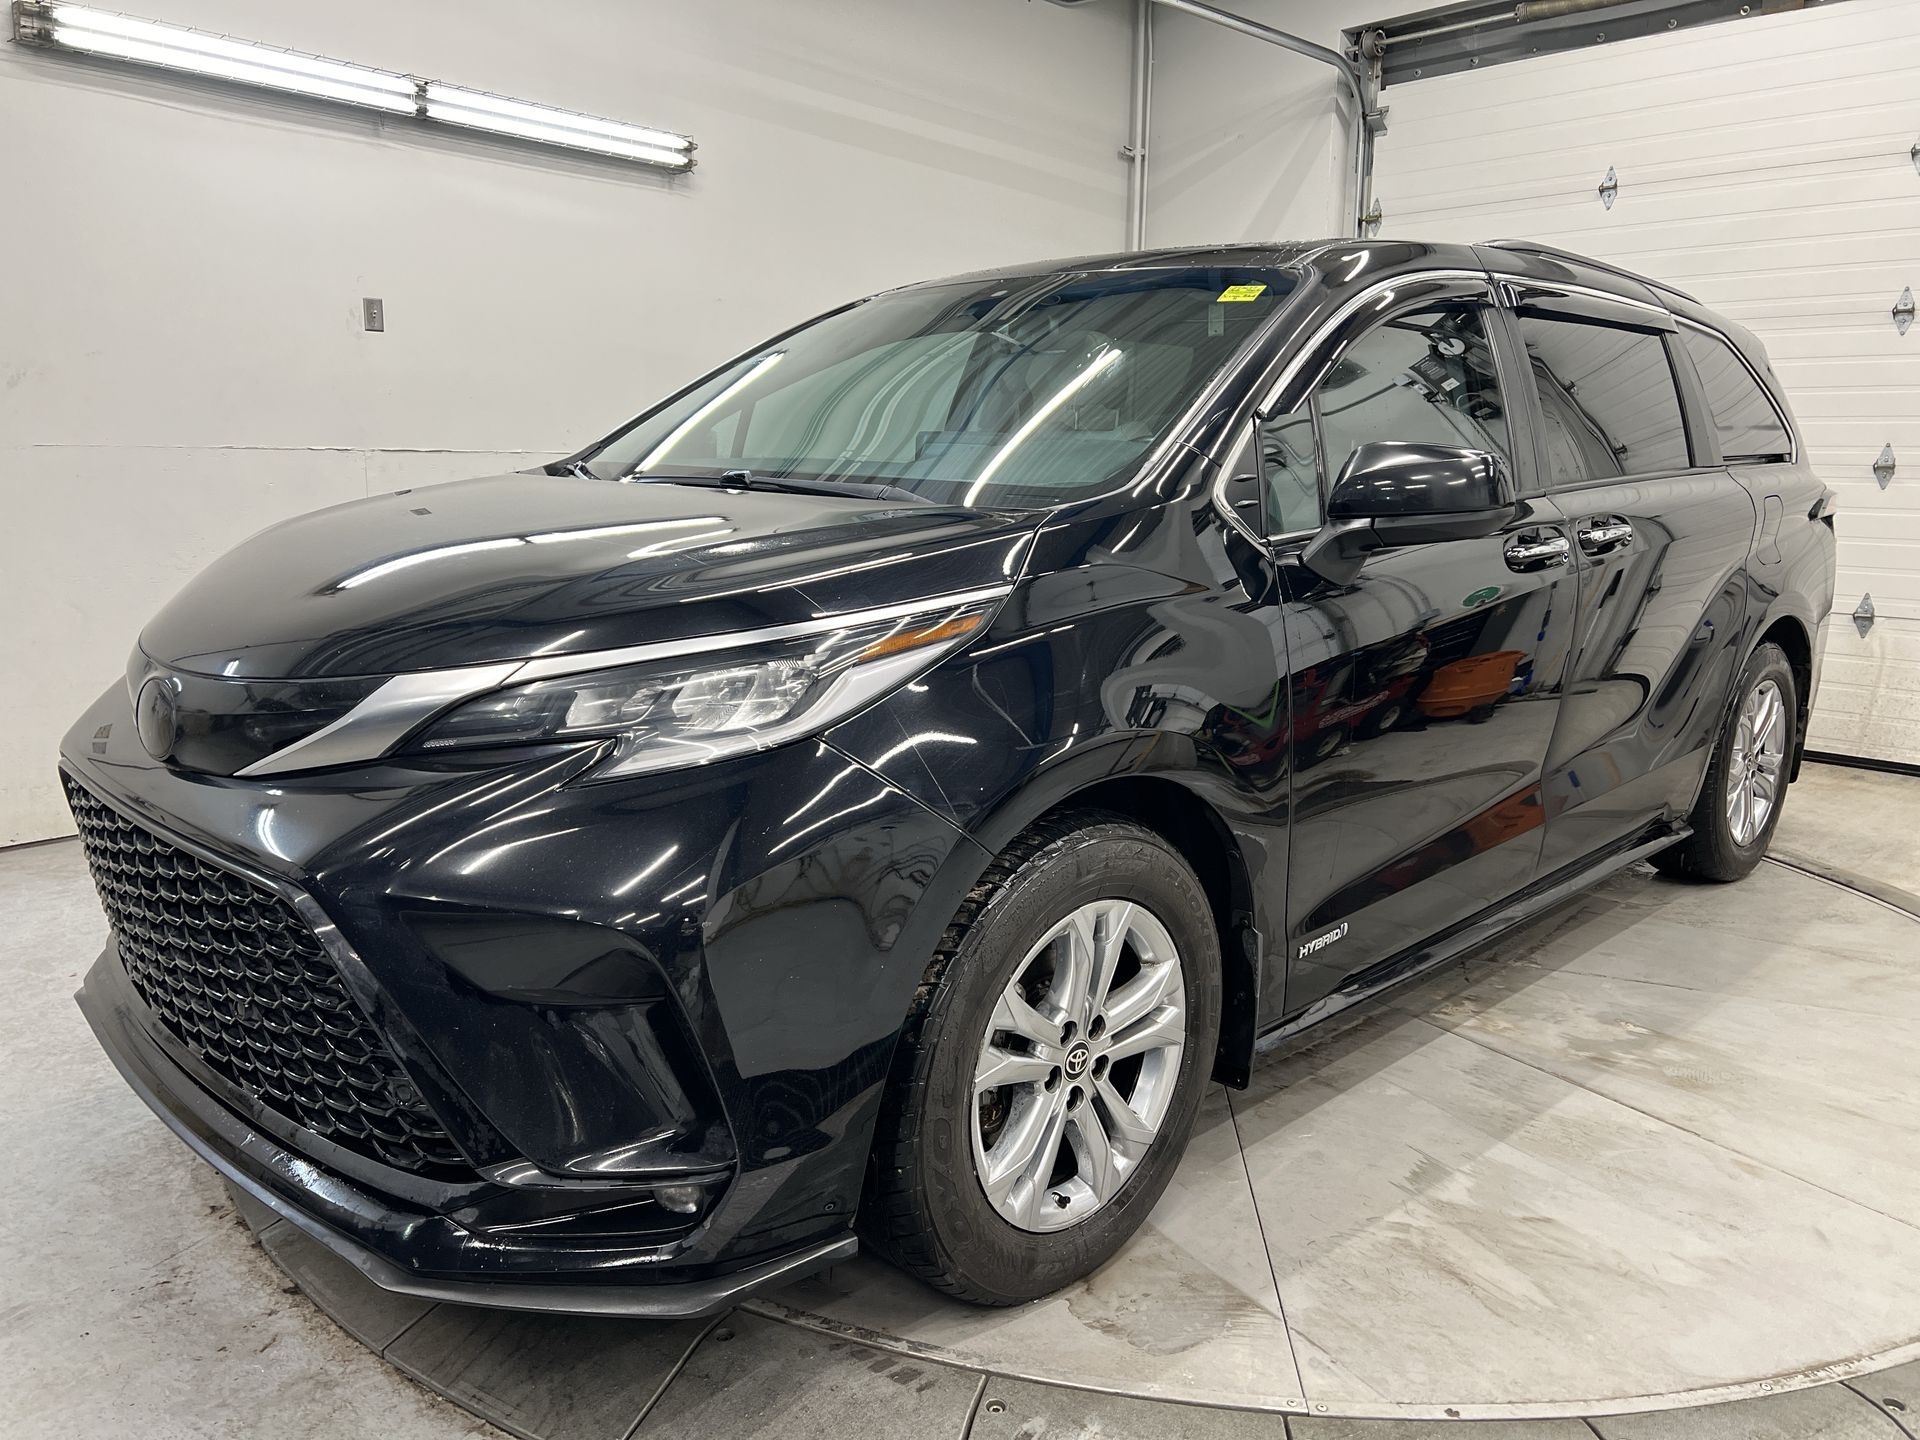 2021 Toyota Sienna XSE HYBRID AWD| 7-PASS | LEATHER |SUNROOF |LOW KMS